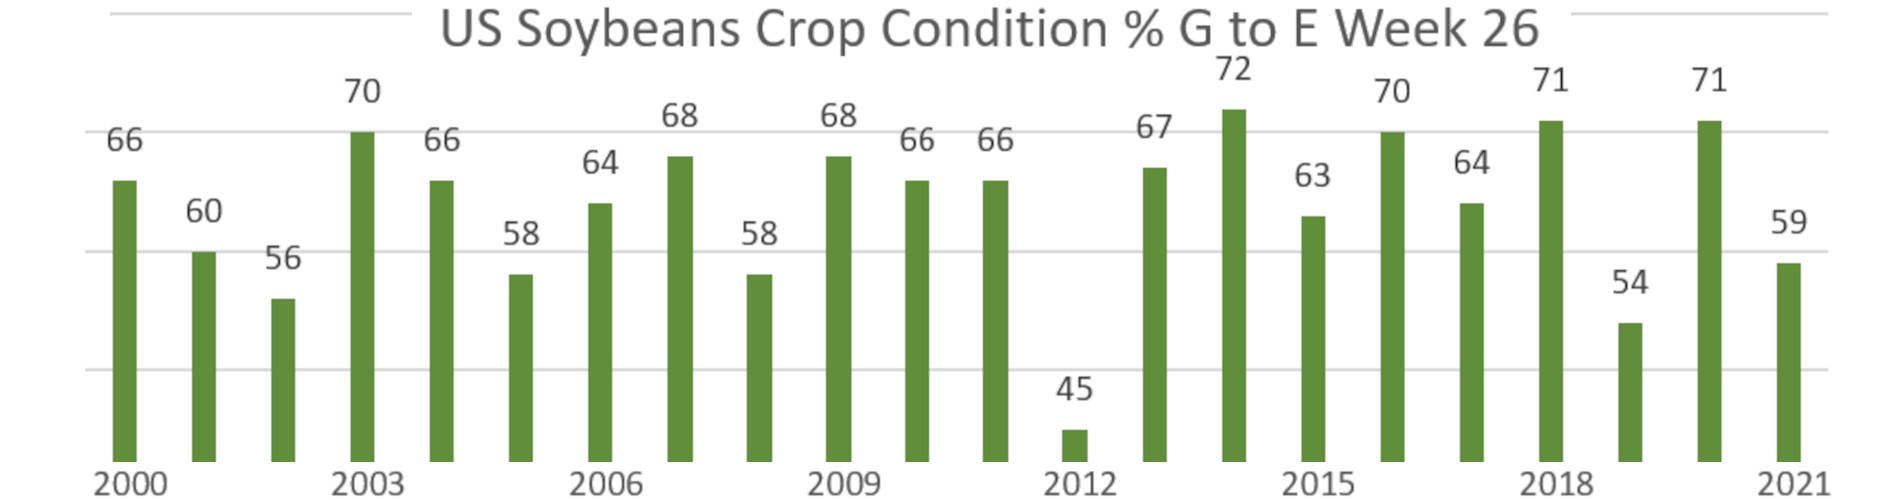 US soybean crop conditions over the years